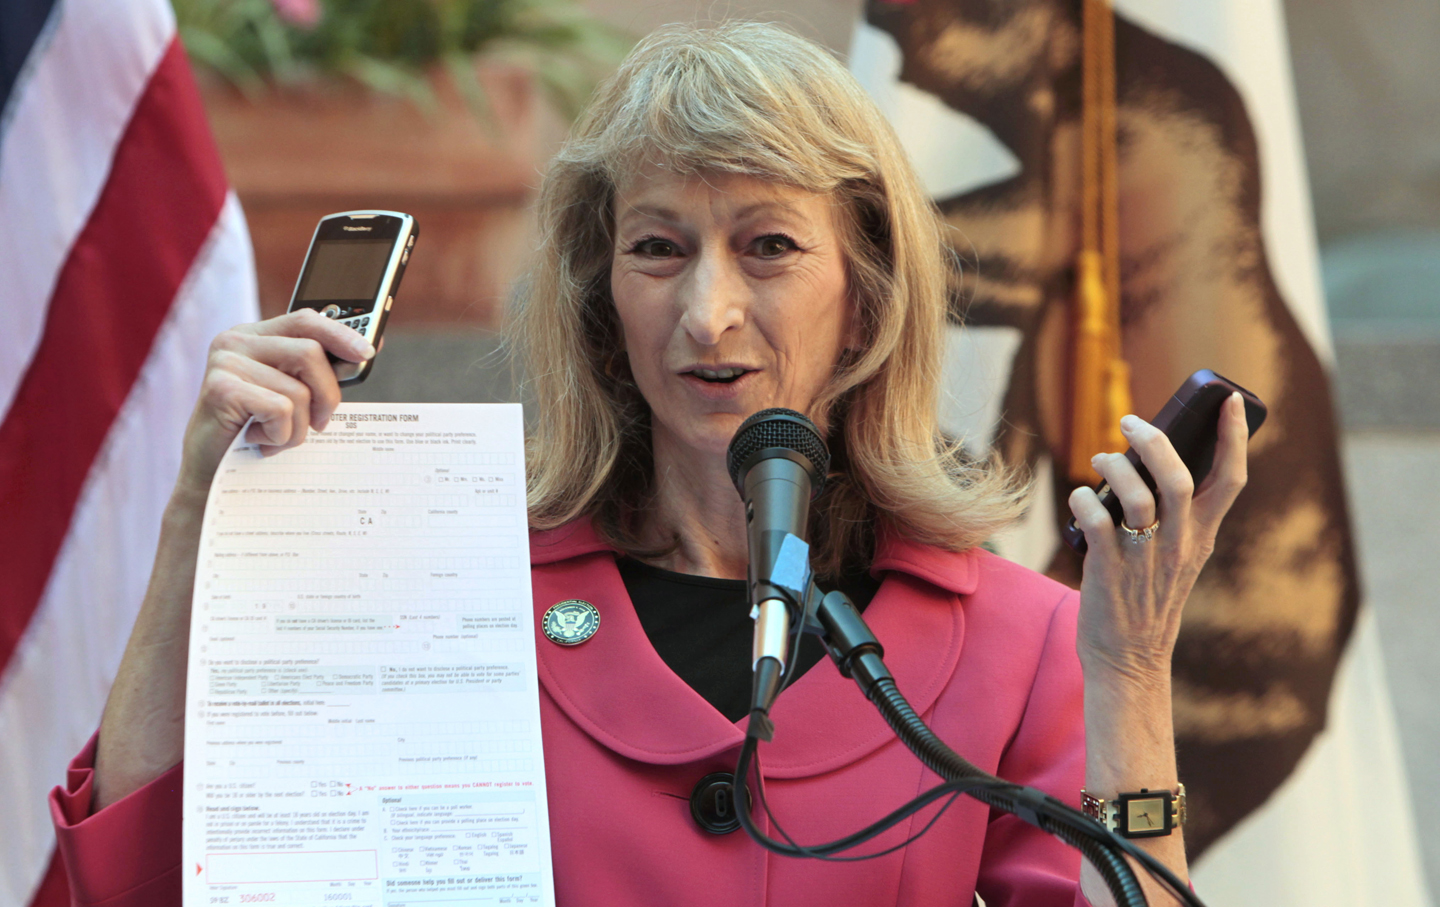 California Secretary of State Debra Bowen displays cellphones and a paper form following the signing of California's new online voter registration bill.